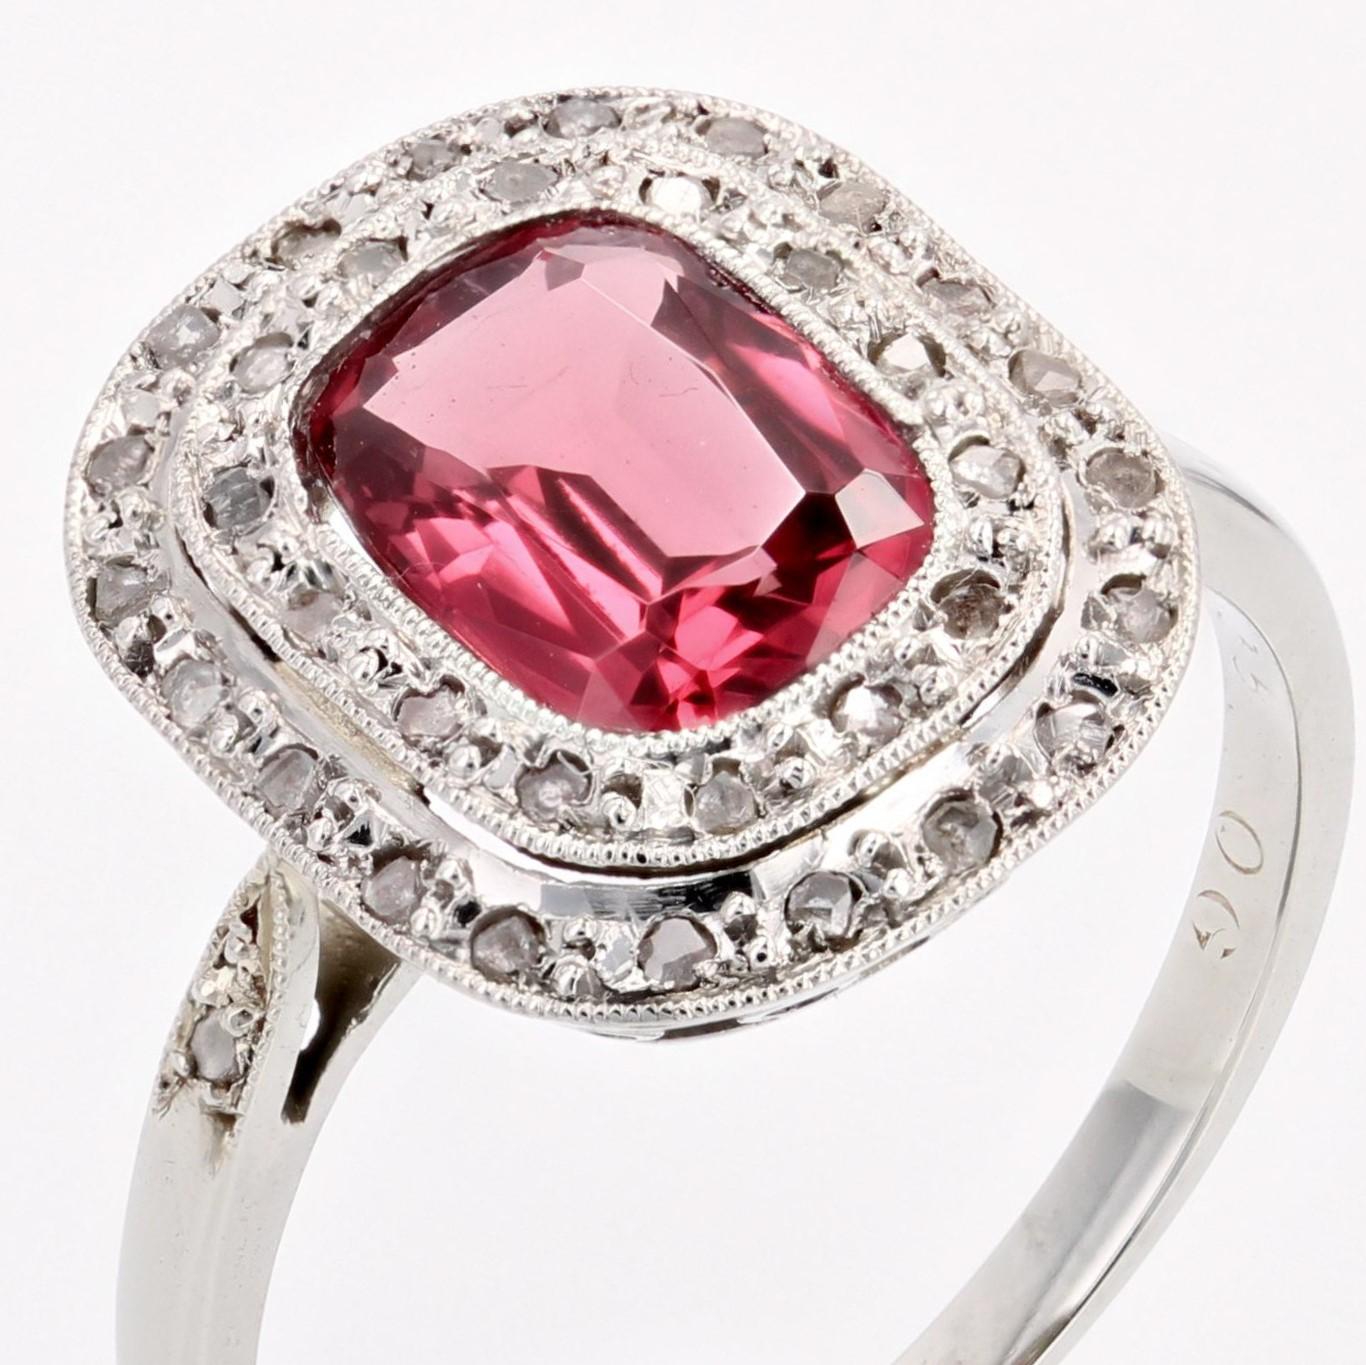 French 1930s 1.20 Carat Red Spinel Diamonds 18 Karat White Gold Ring For Sale 3